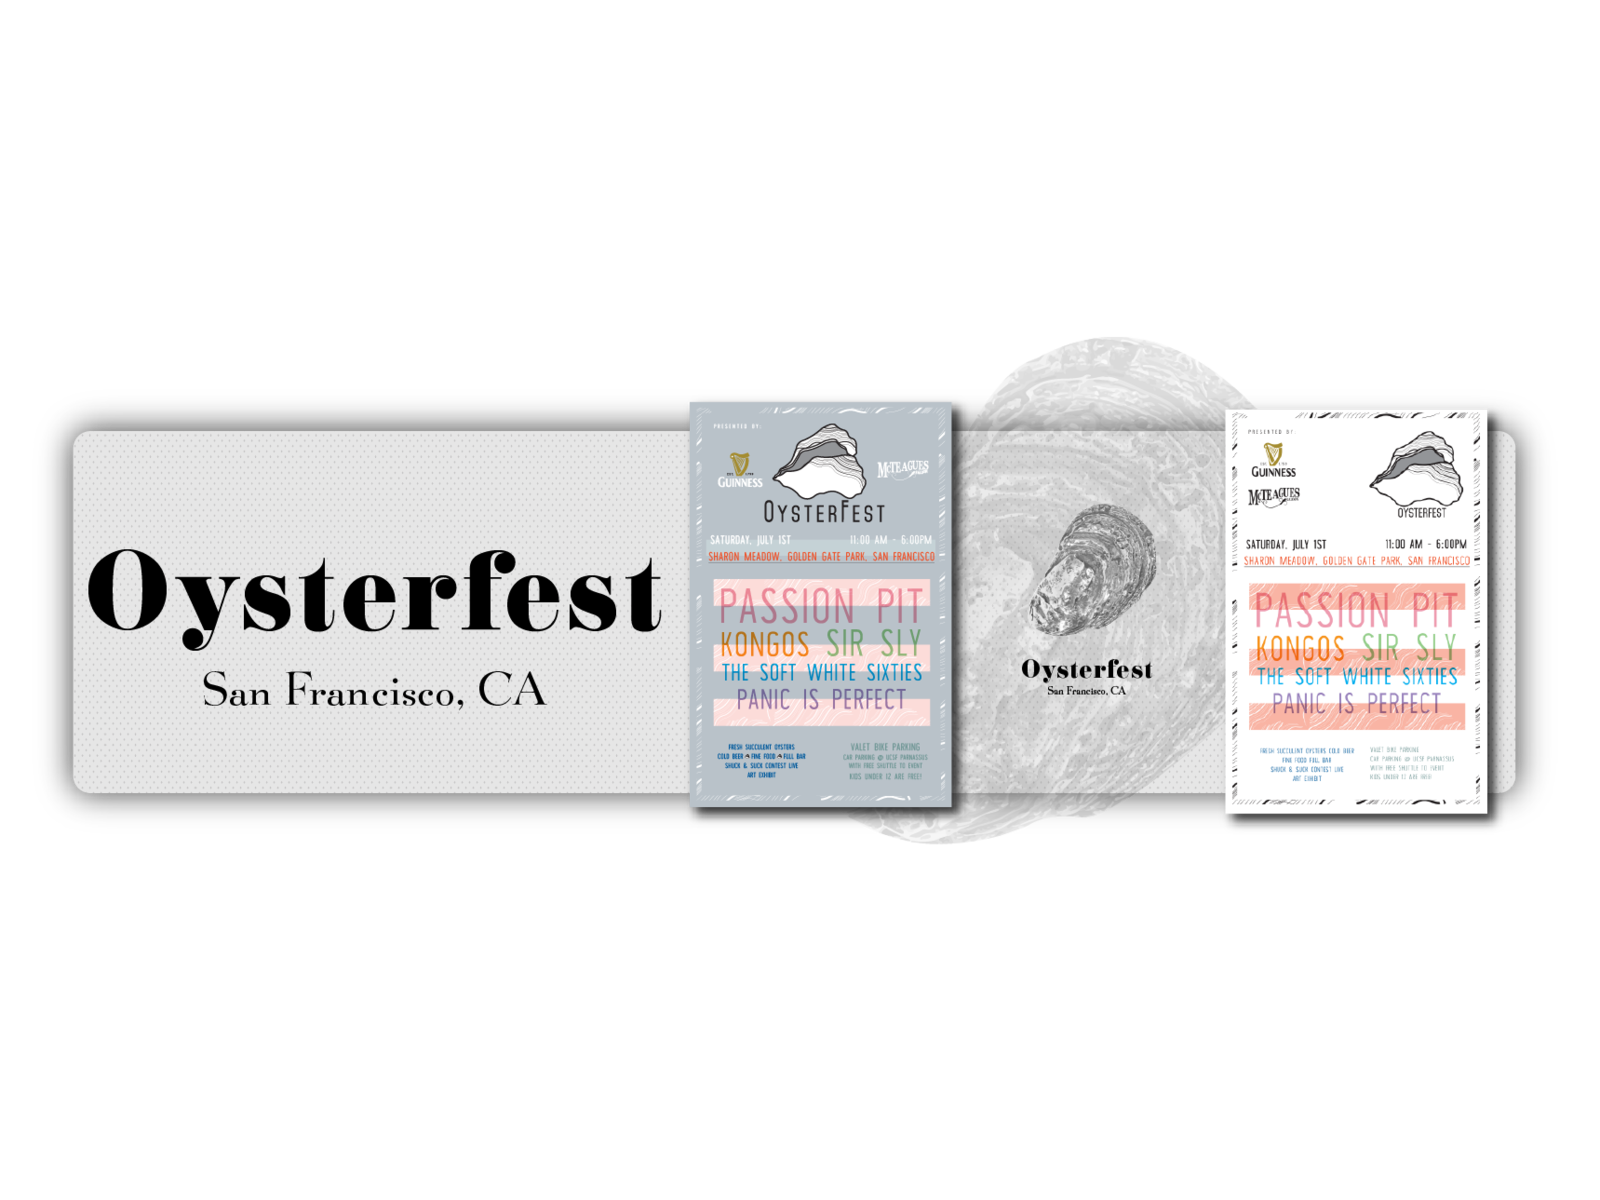 San Francisco's Oysterfest Poster Explorations by Maui Uy on Dribbble